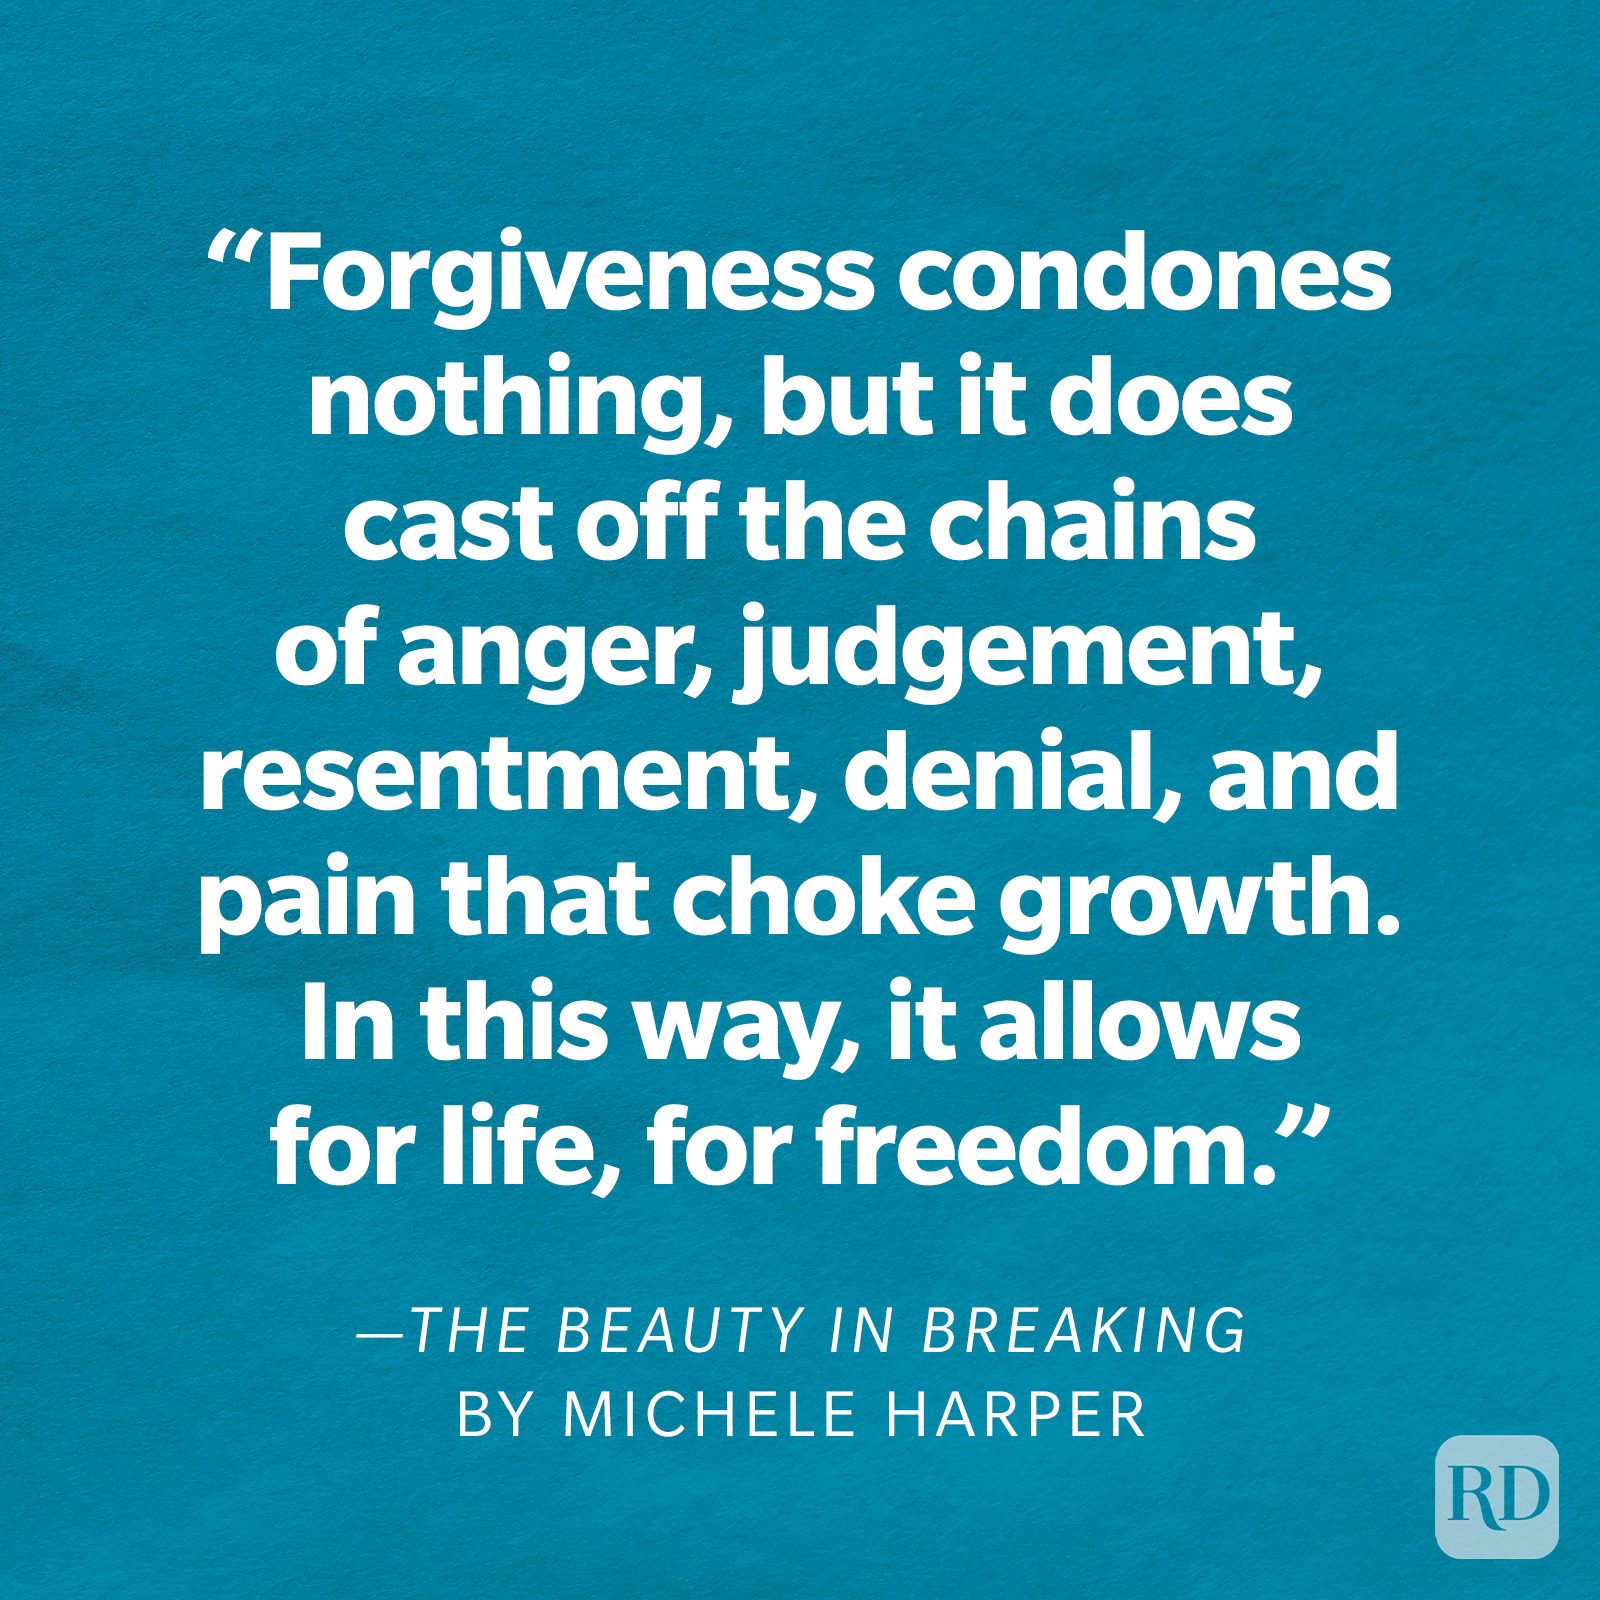 The Beauty in Breaking by Michele Harper "Forgiveness condones nothing, but it does cast off the chains of anger, judgment, resentment, denial, and pain that choke growth. In this way, it allows for life, for freedom."